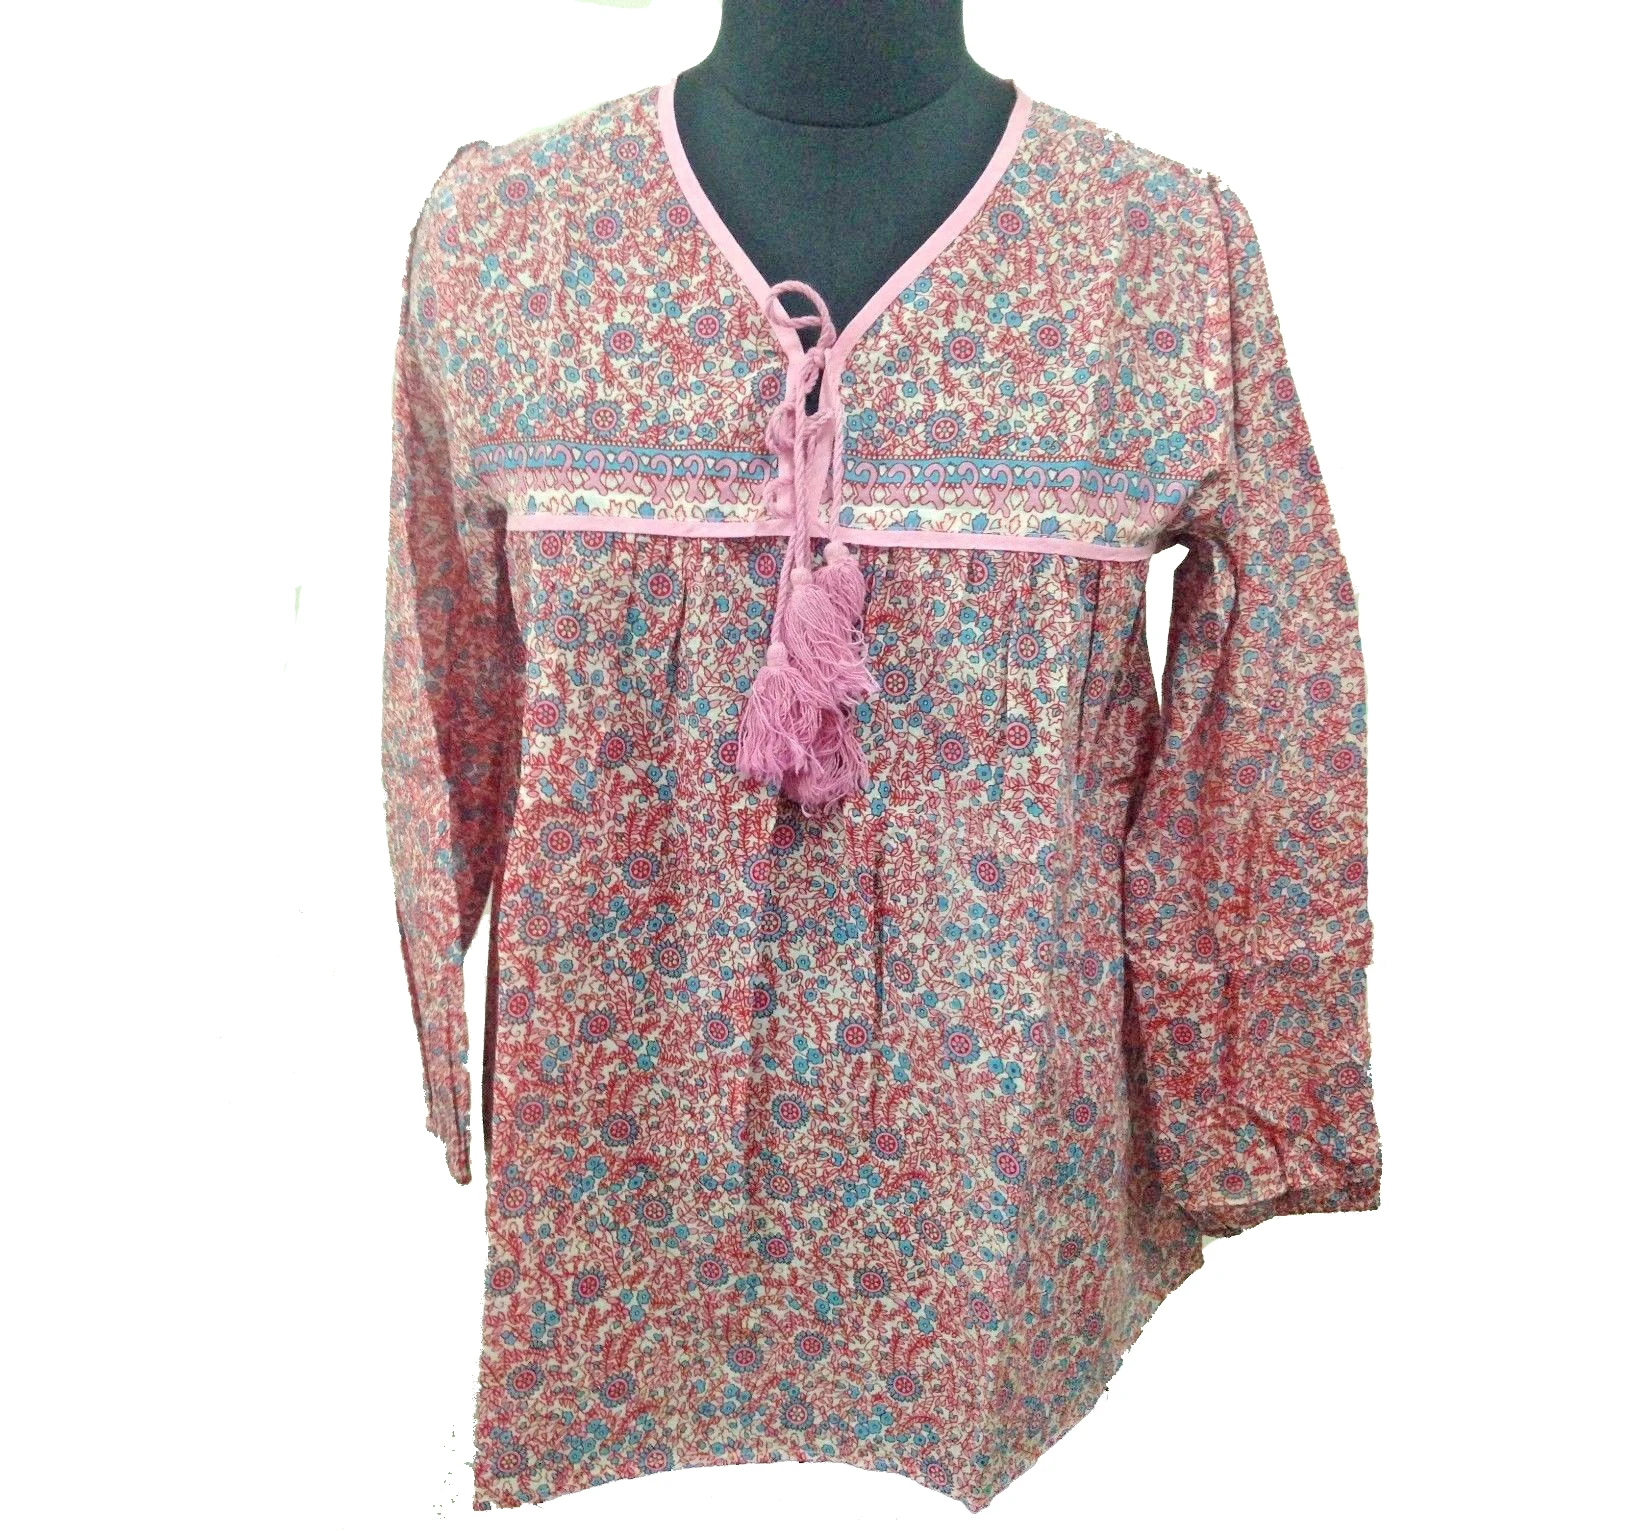 Printed Maxi - Buy Ladies Blouse,Indian Cotton Blouses,Cotton Voile Blouse Product on Alibaba.com